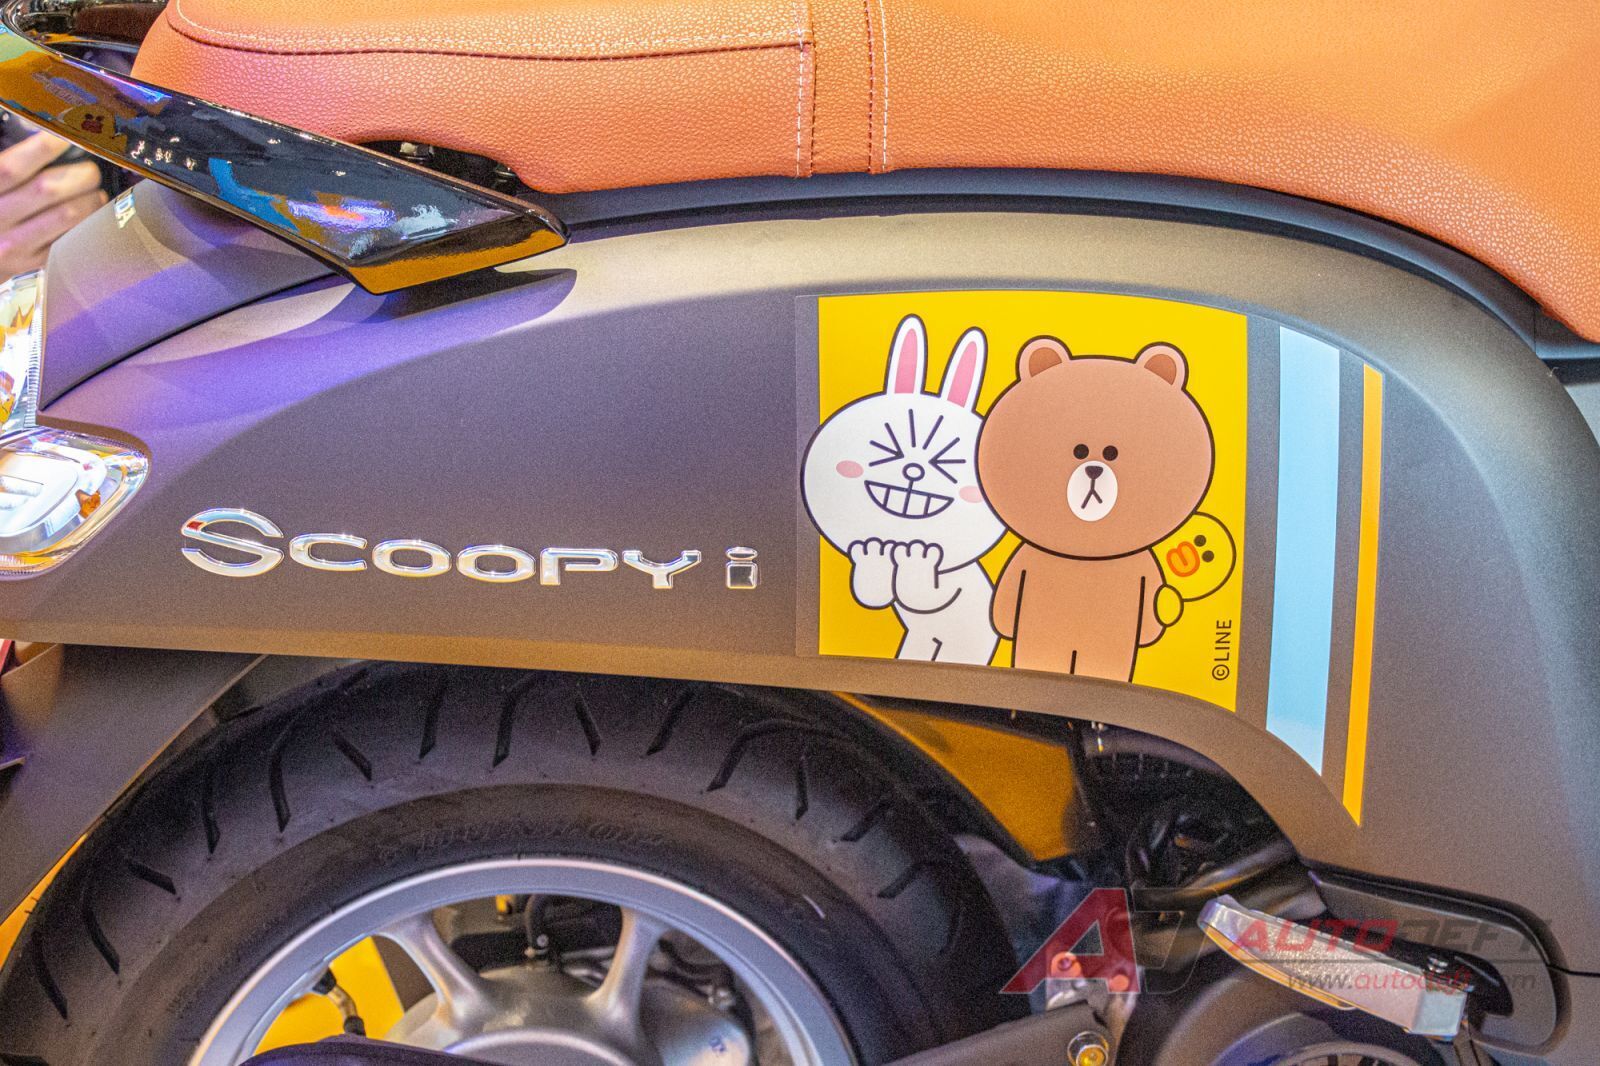 Honda Scoopy i LINE FRIENDS Special Edition